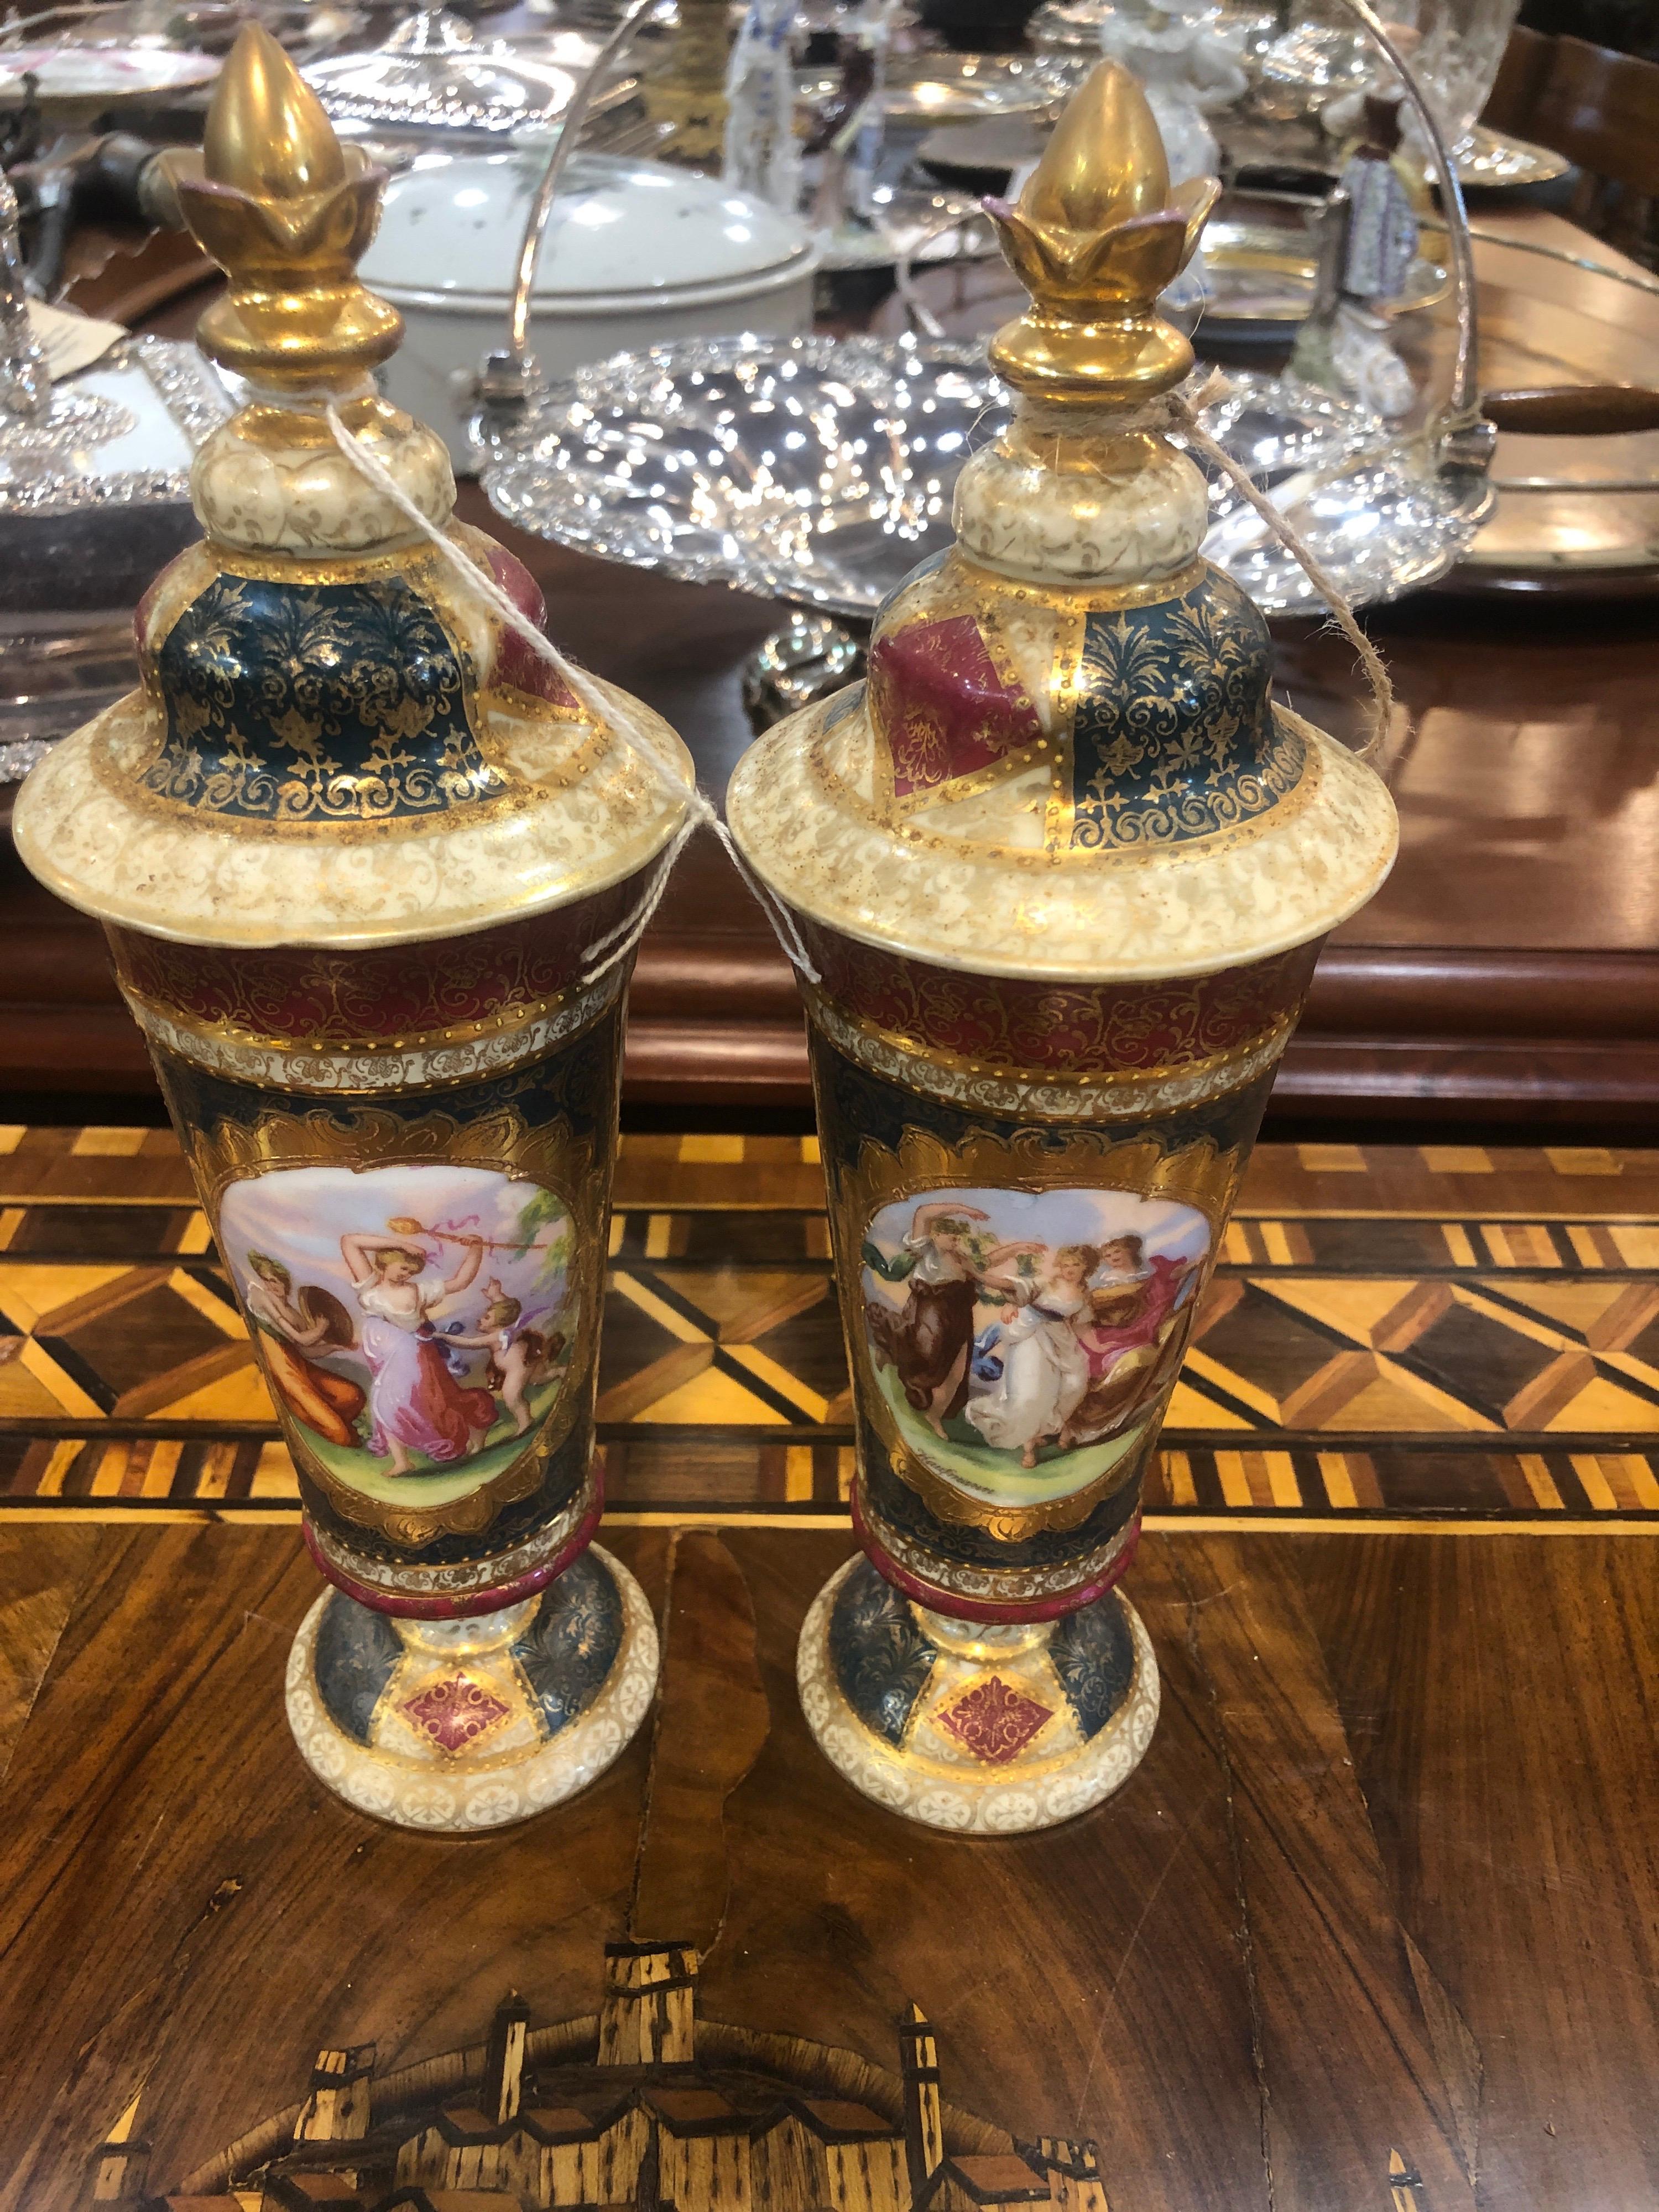 Pair of vases by Royal Vienna, painted and gilded, vases of well-proportioned and of excellent workmanship, in excellent state of preservation, circa 1870.